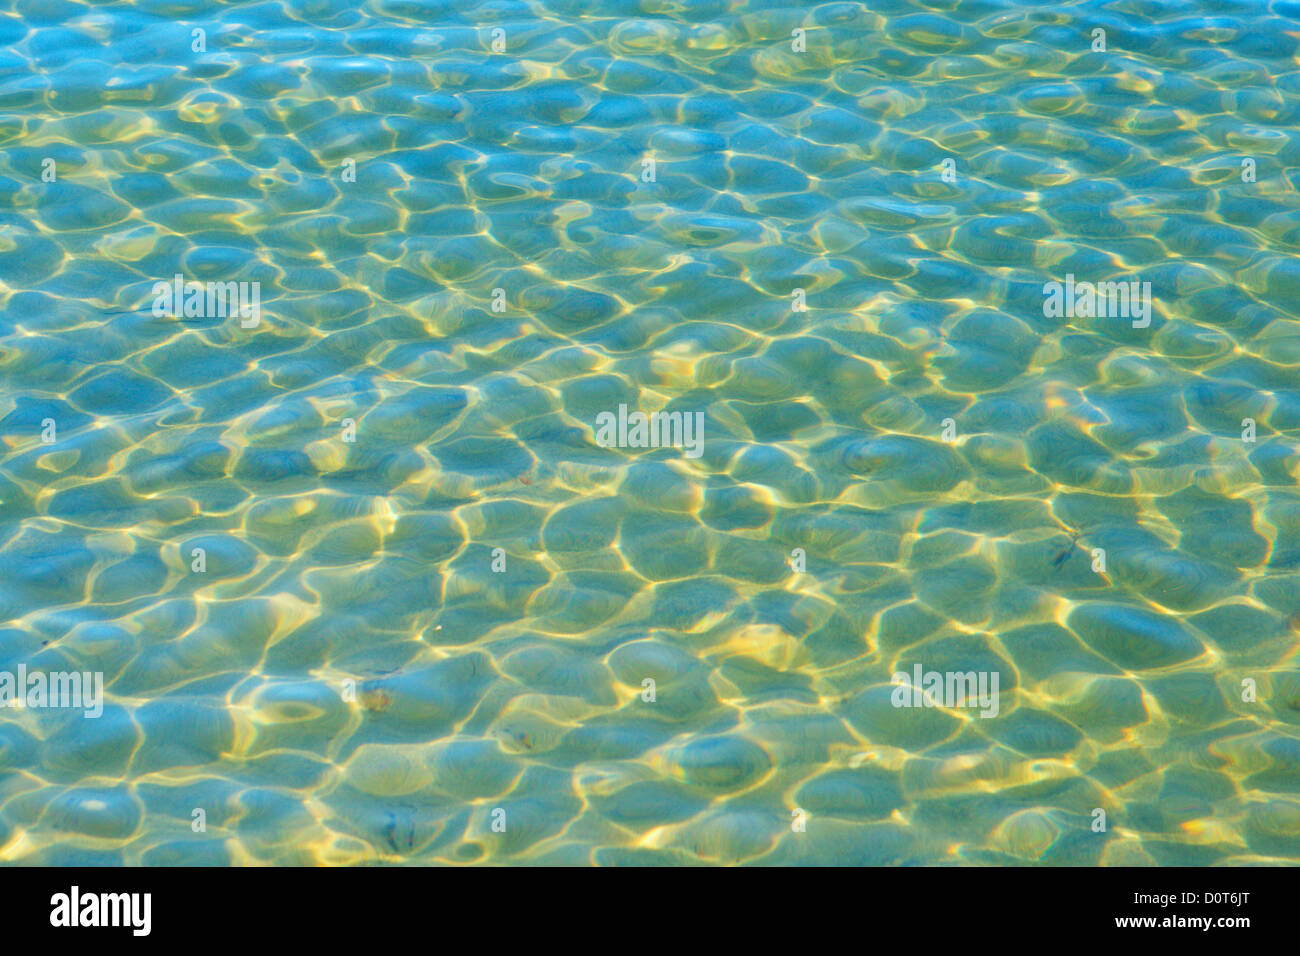 Rippling Water Stock Photo